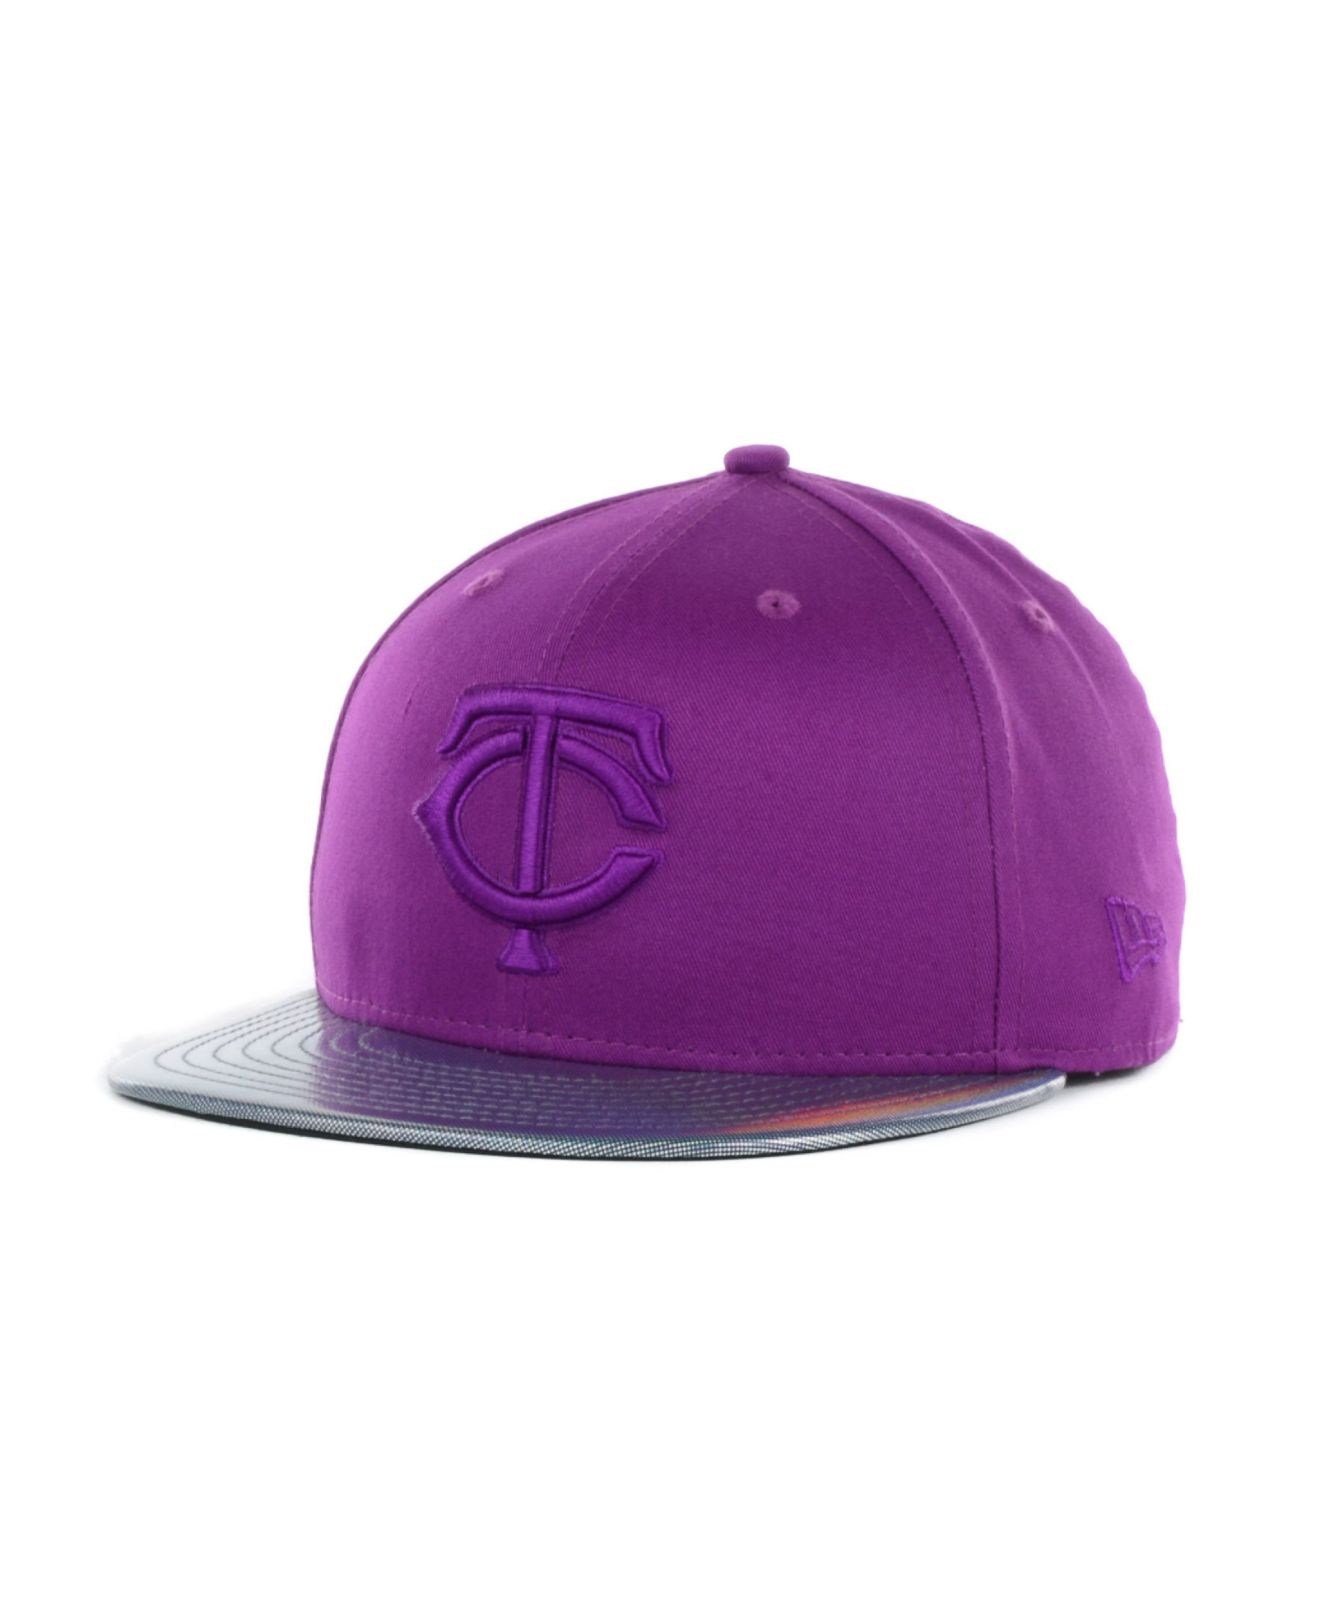 Lyst - Ktz Minnesota Twins Holo-fitted 59fifty Cap in Purple for Men